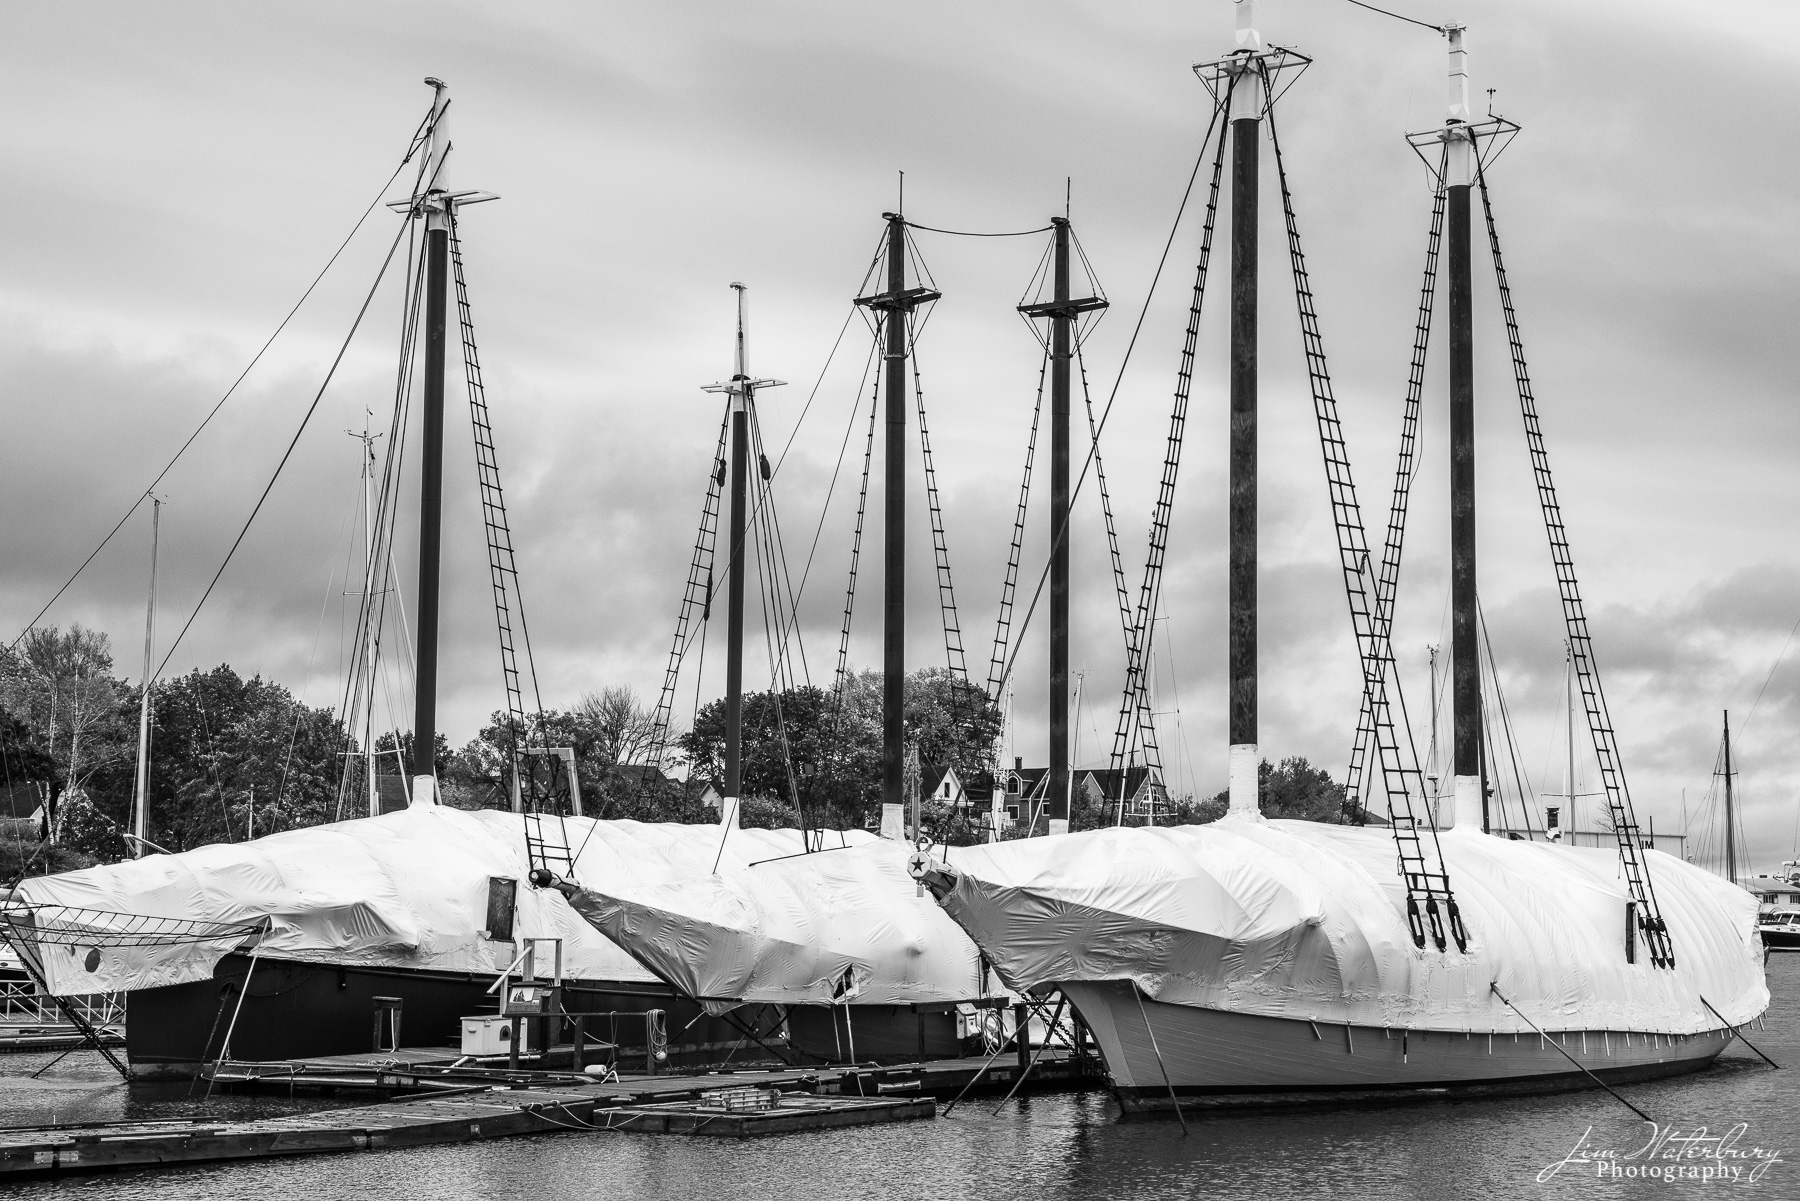 Black & white image of masts of boats, shrink-wrapped for winter, in the harbor at Camden, Maine